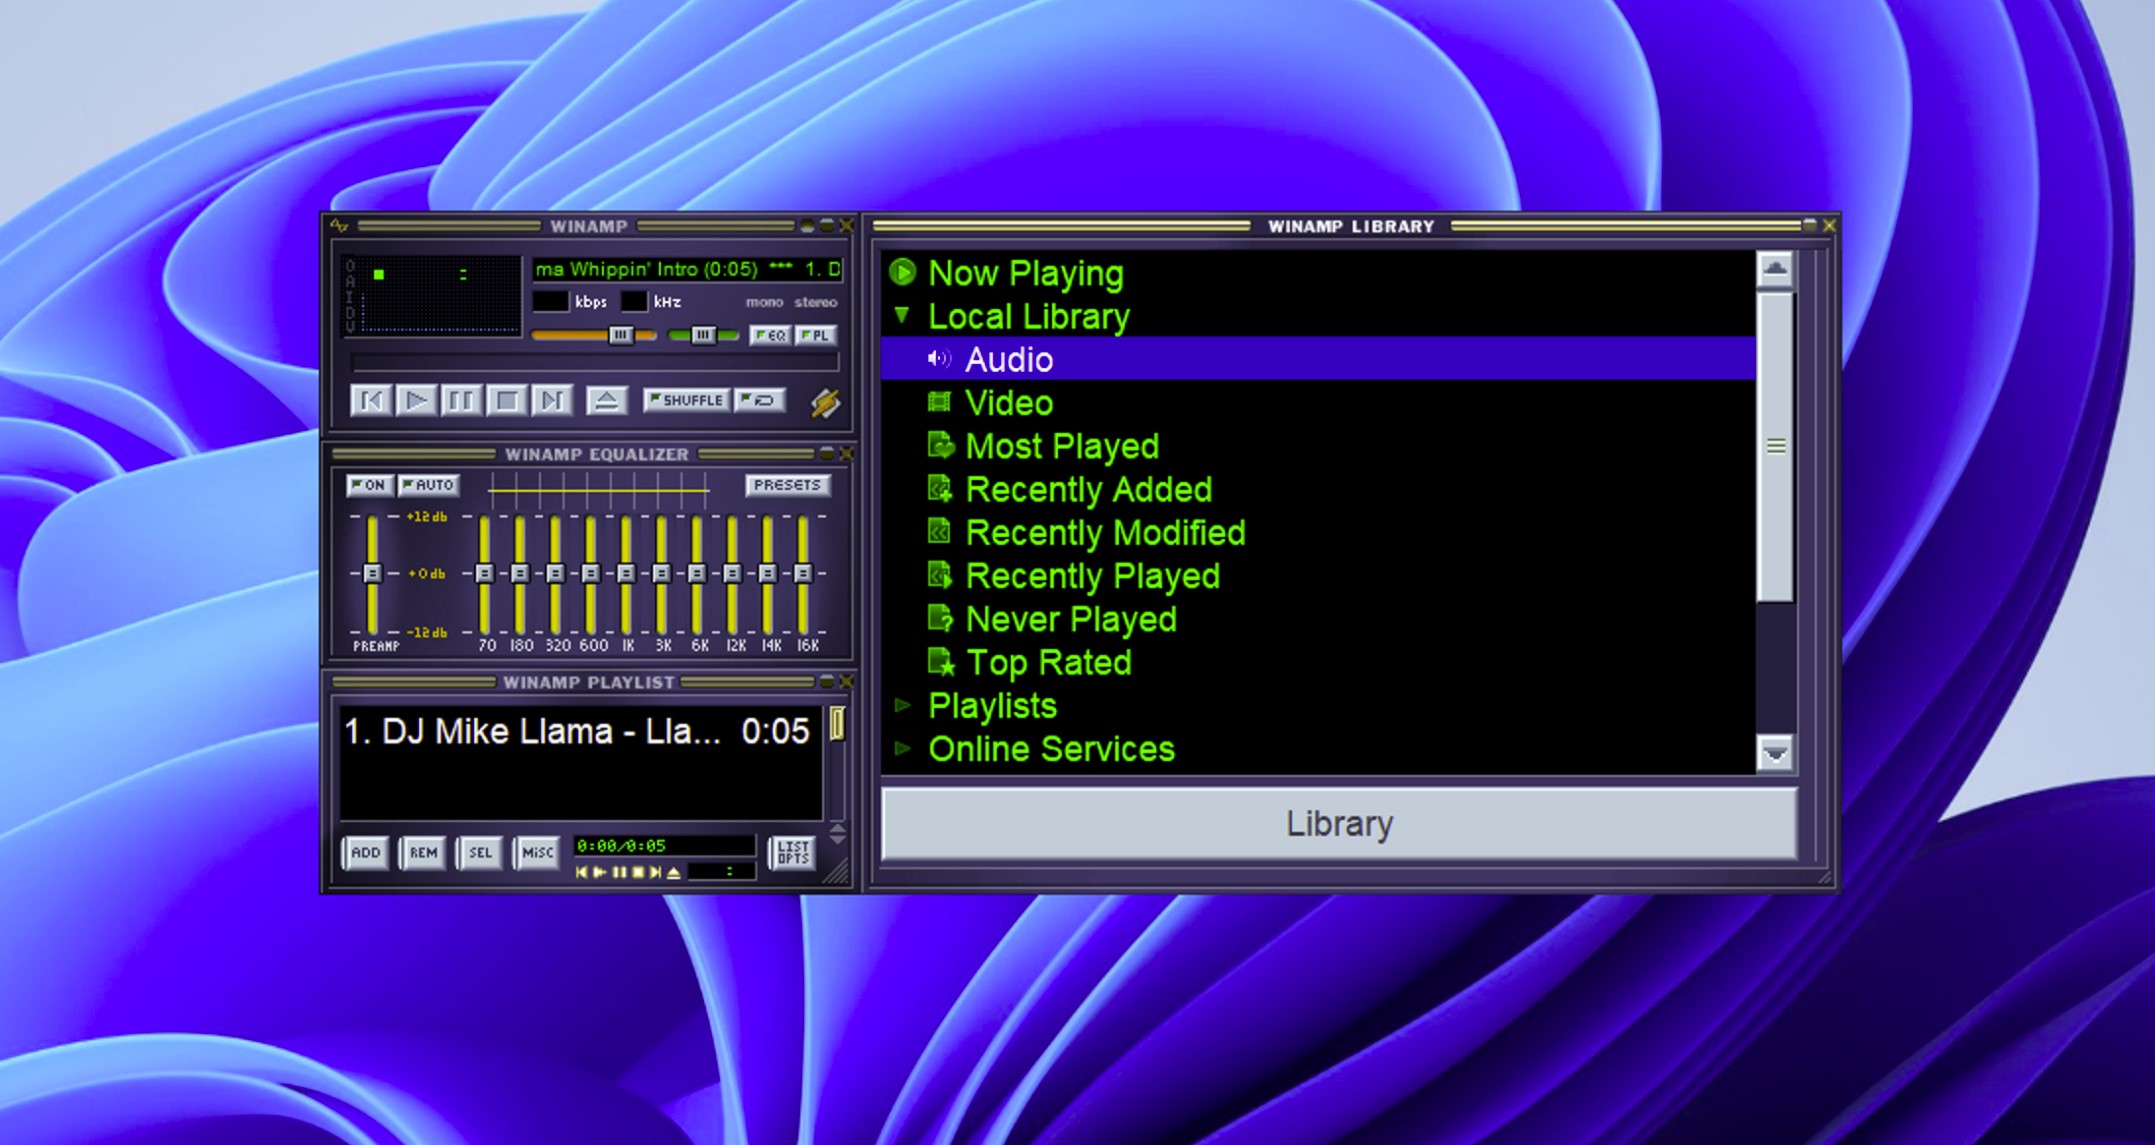 Legendary MP3 player Winamp is coming back